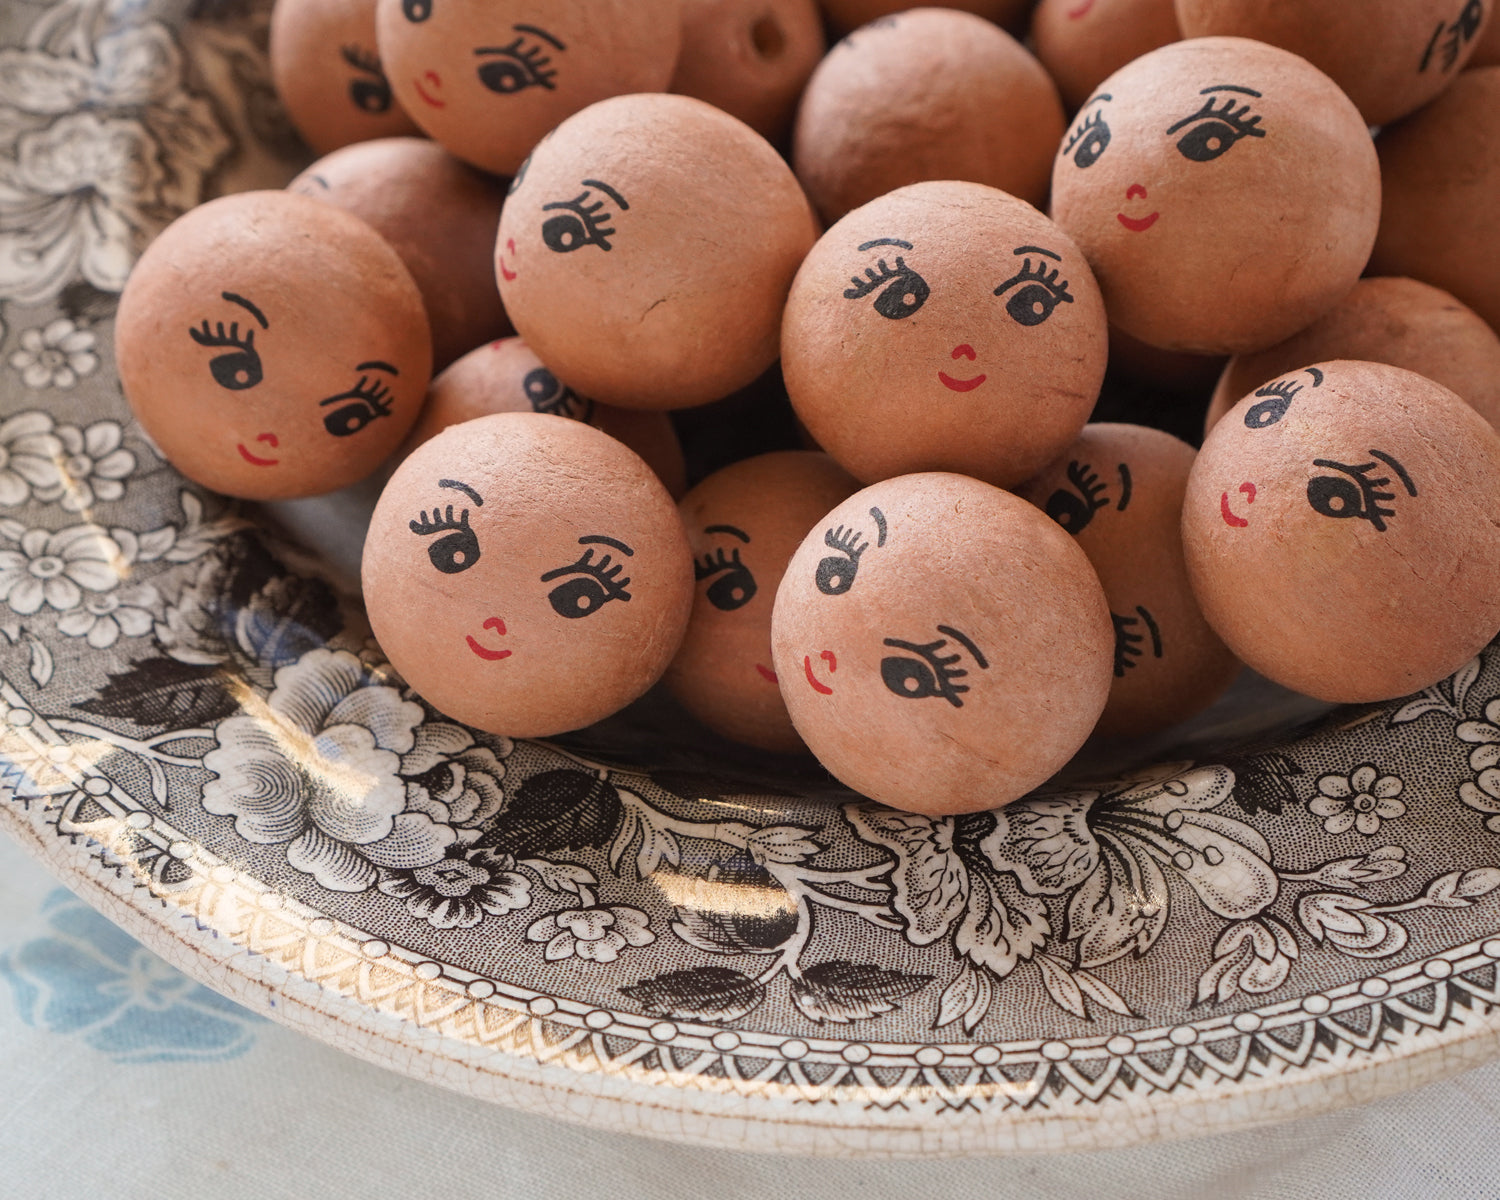 Brown Spun Cotton Heads: CHARM - 30mm Vintage-Style Cotton Doll Heads with Faces, 12 Pcs.